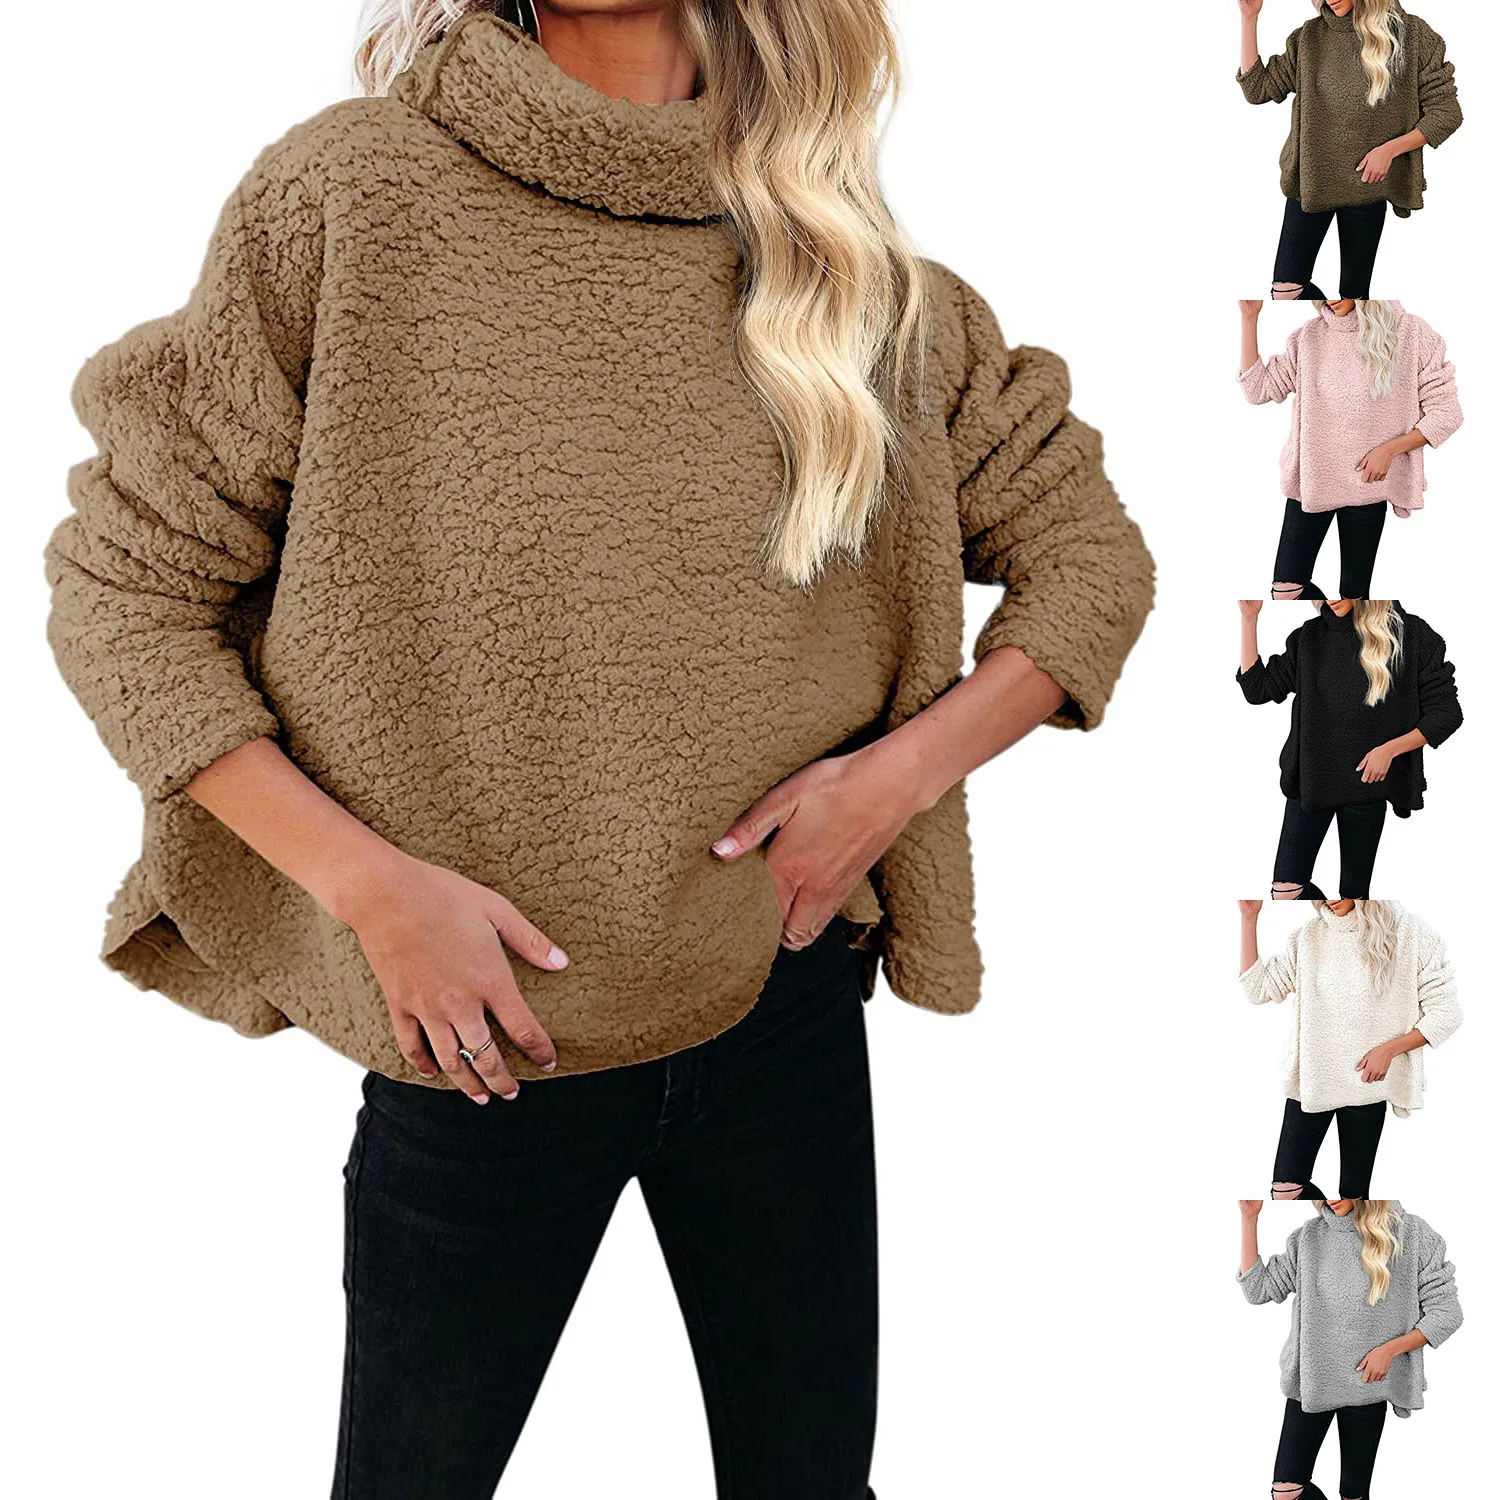 

Plus Size 5XL Turtleneck Fluffy Sweater Autumn Winter Sweet Fashion Long Sleeve Casual Solid Color Pullover For Women pull femme, Shown